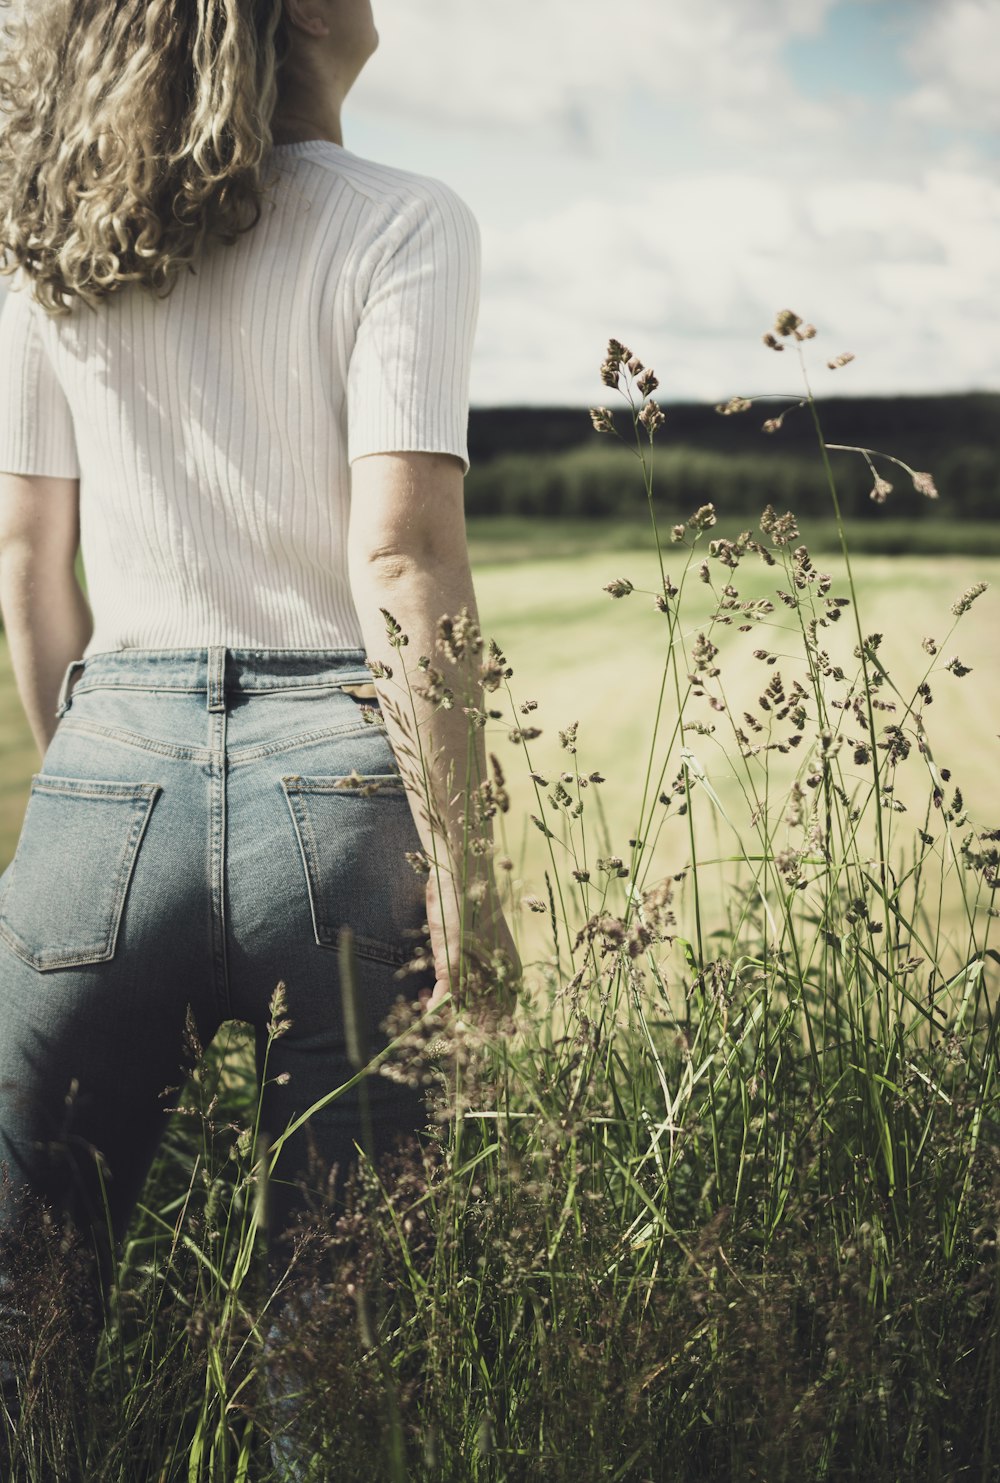 woman in white shirt and blue denim jeans standing on green grass field during daytime